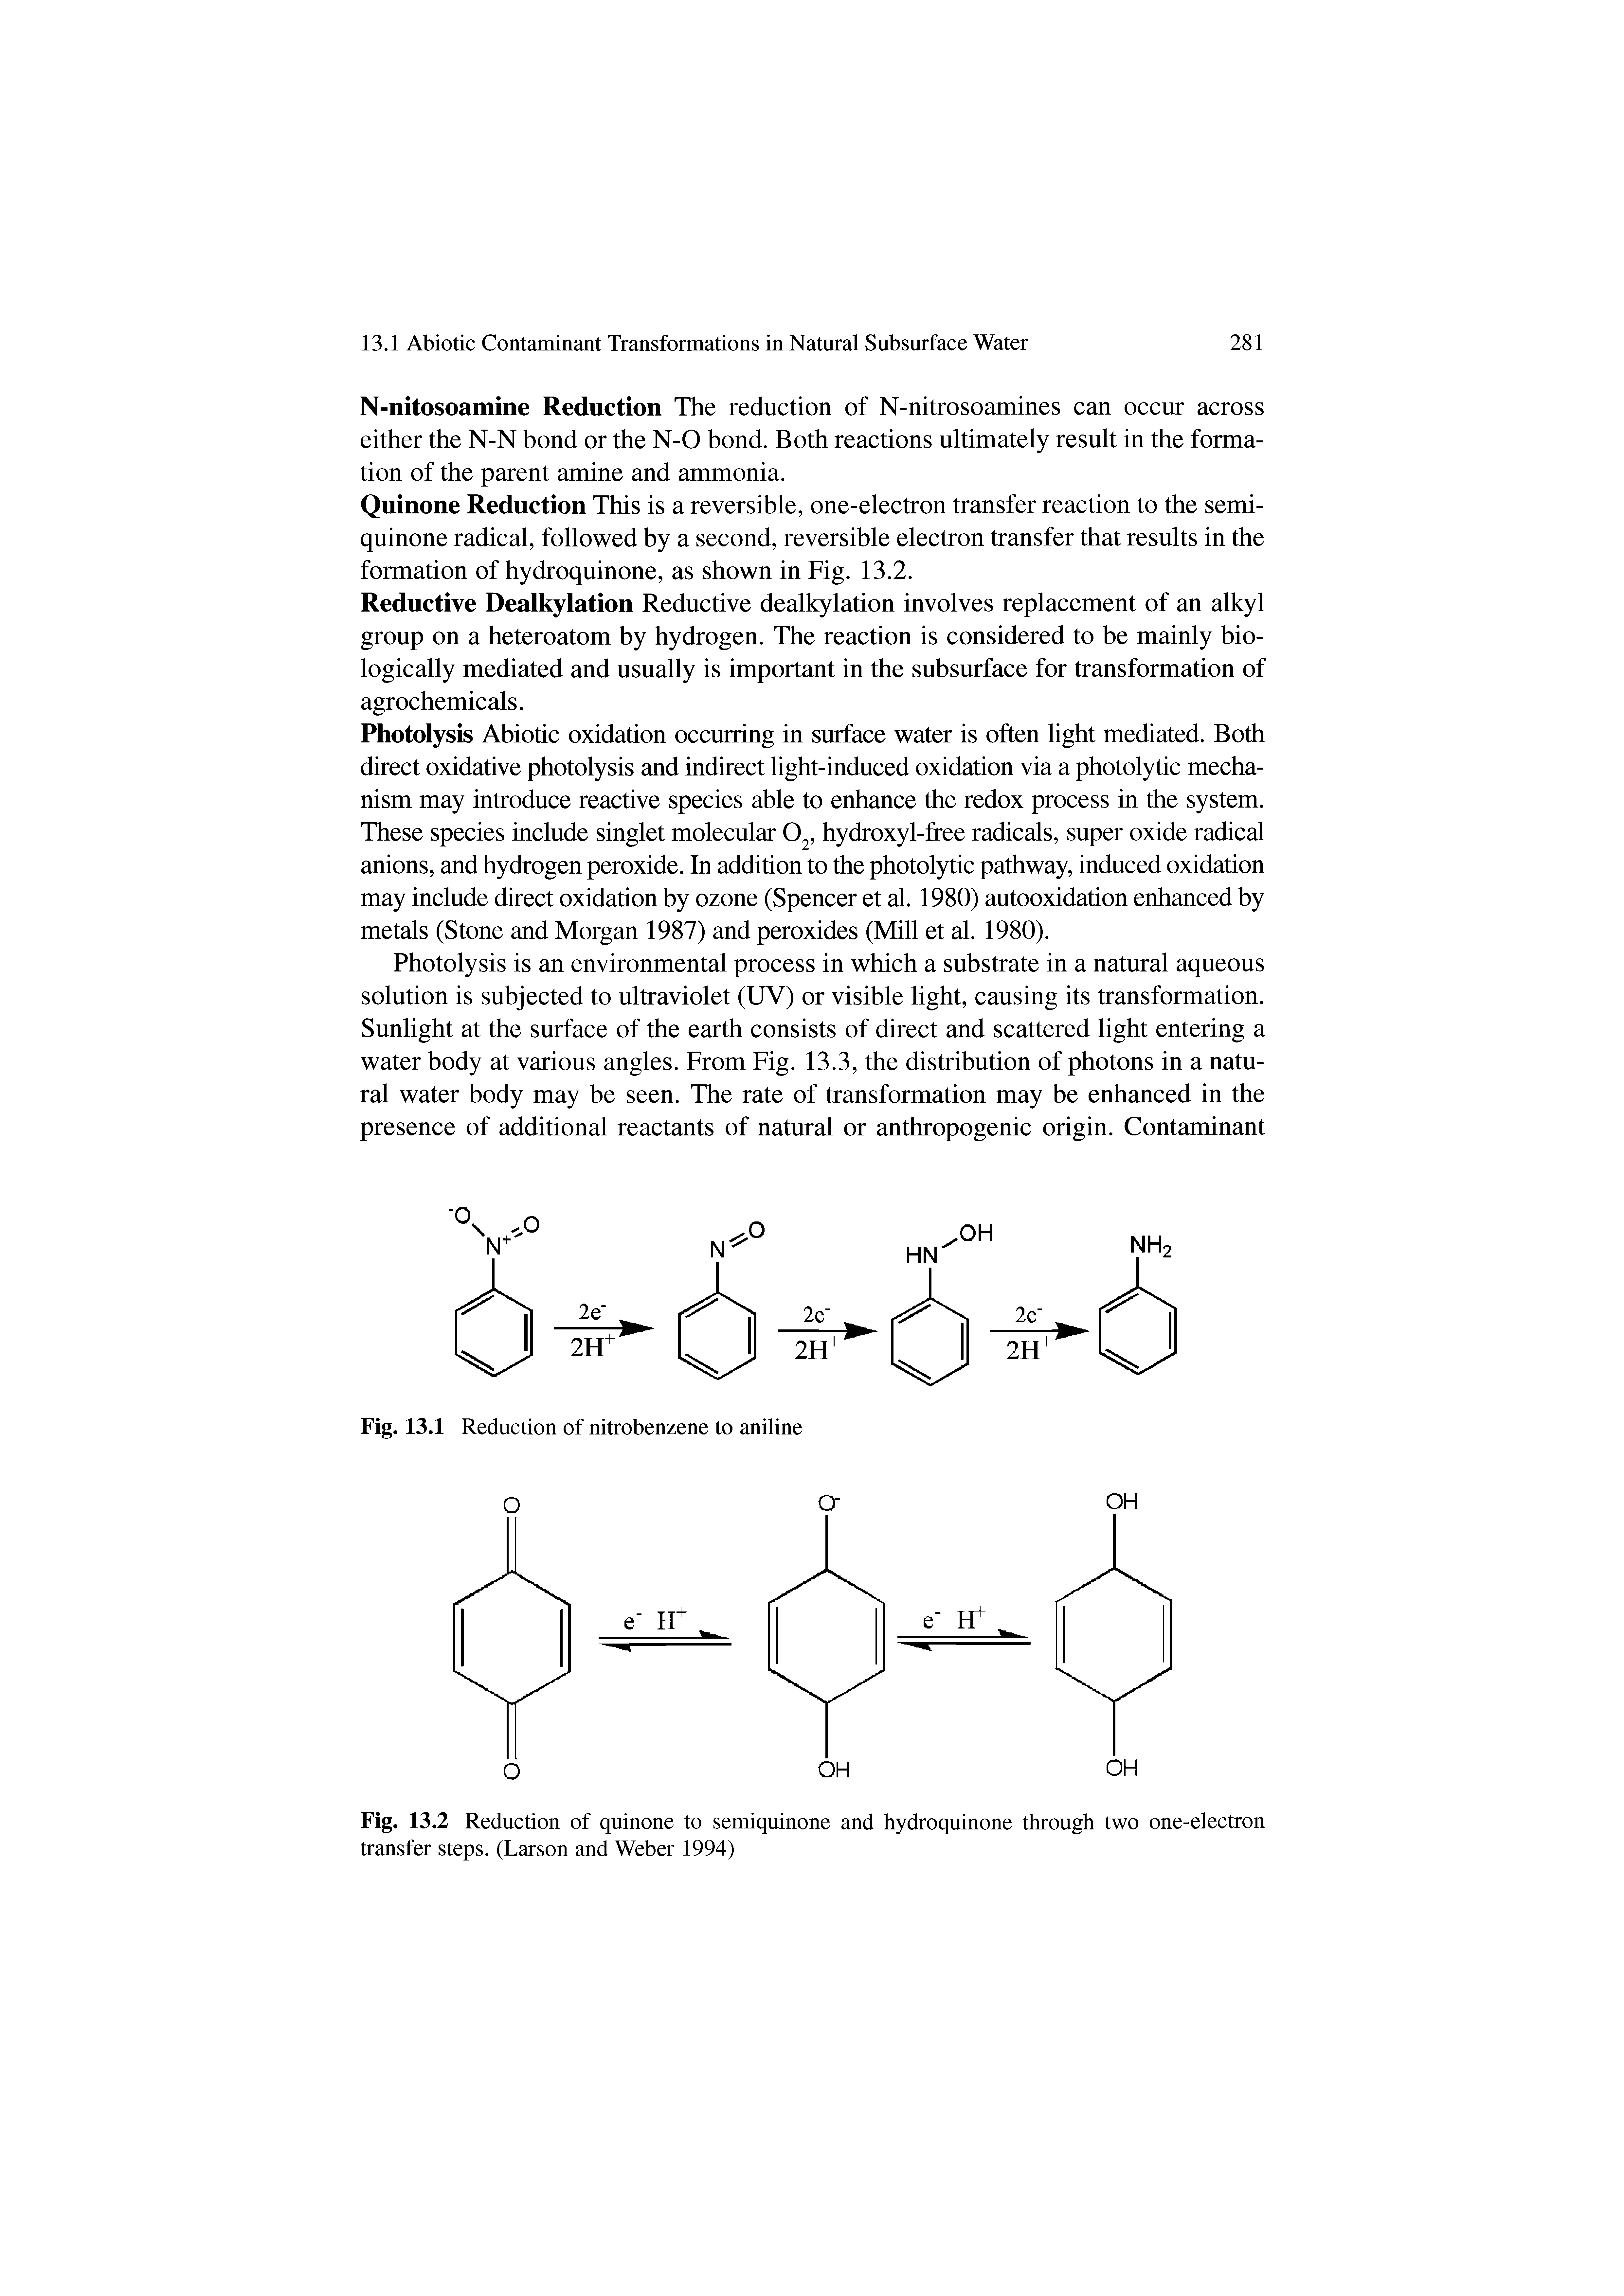 Fig. 13.2 Reduction of quinone to semiquinone and hydroquinone through two one-electron transfer steps. (Larson and Weber 1994)...